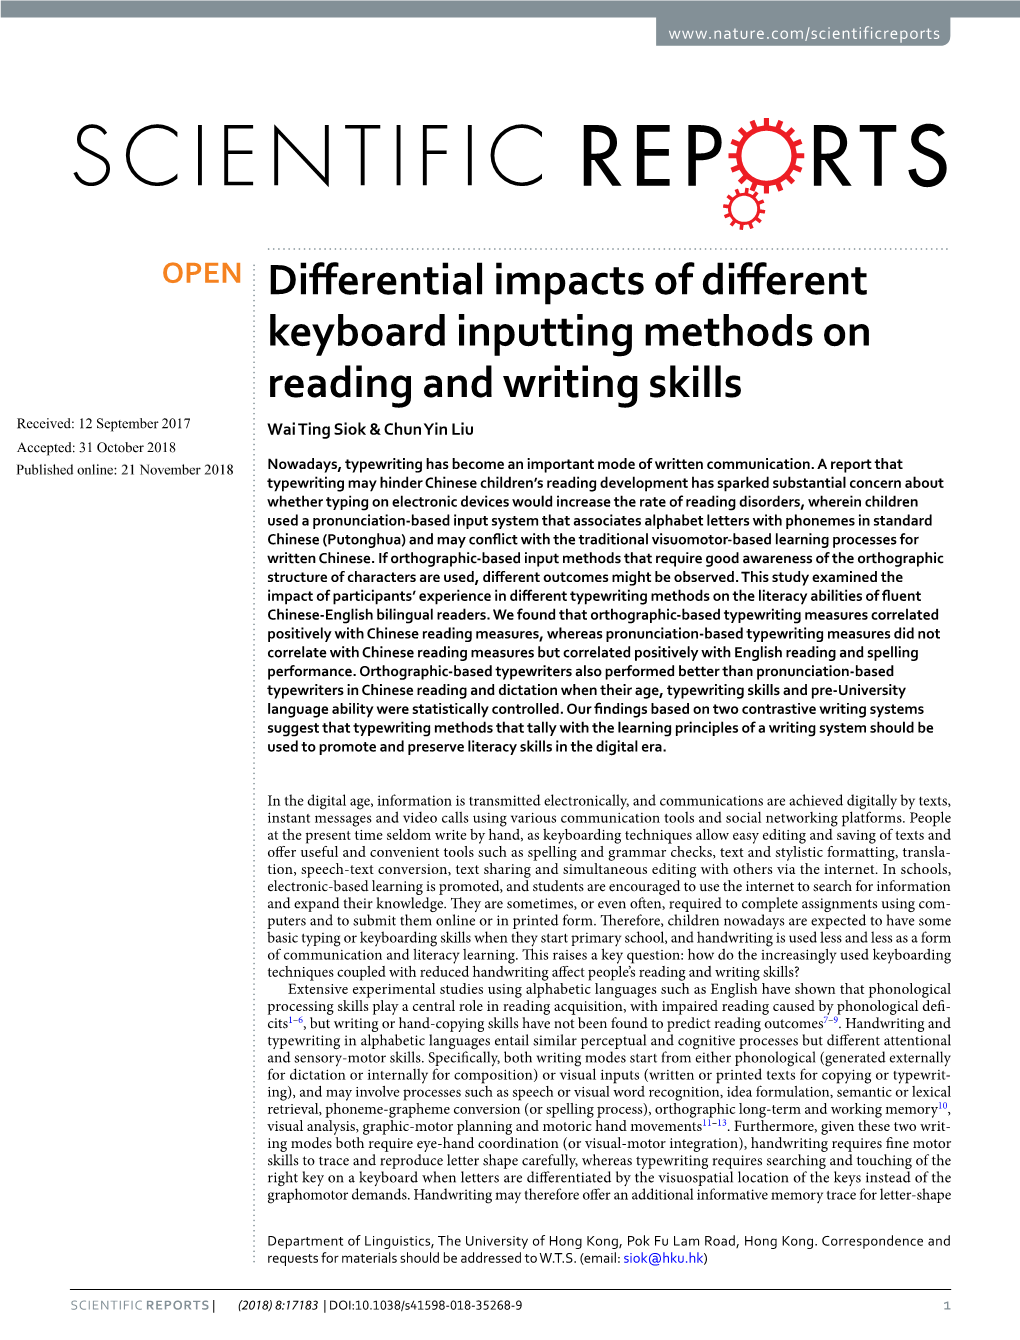 Differential Impacts of Different Keyboard Inputting Methods On